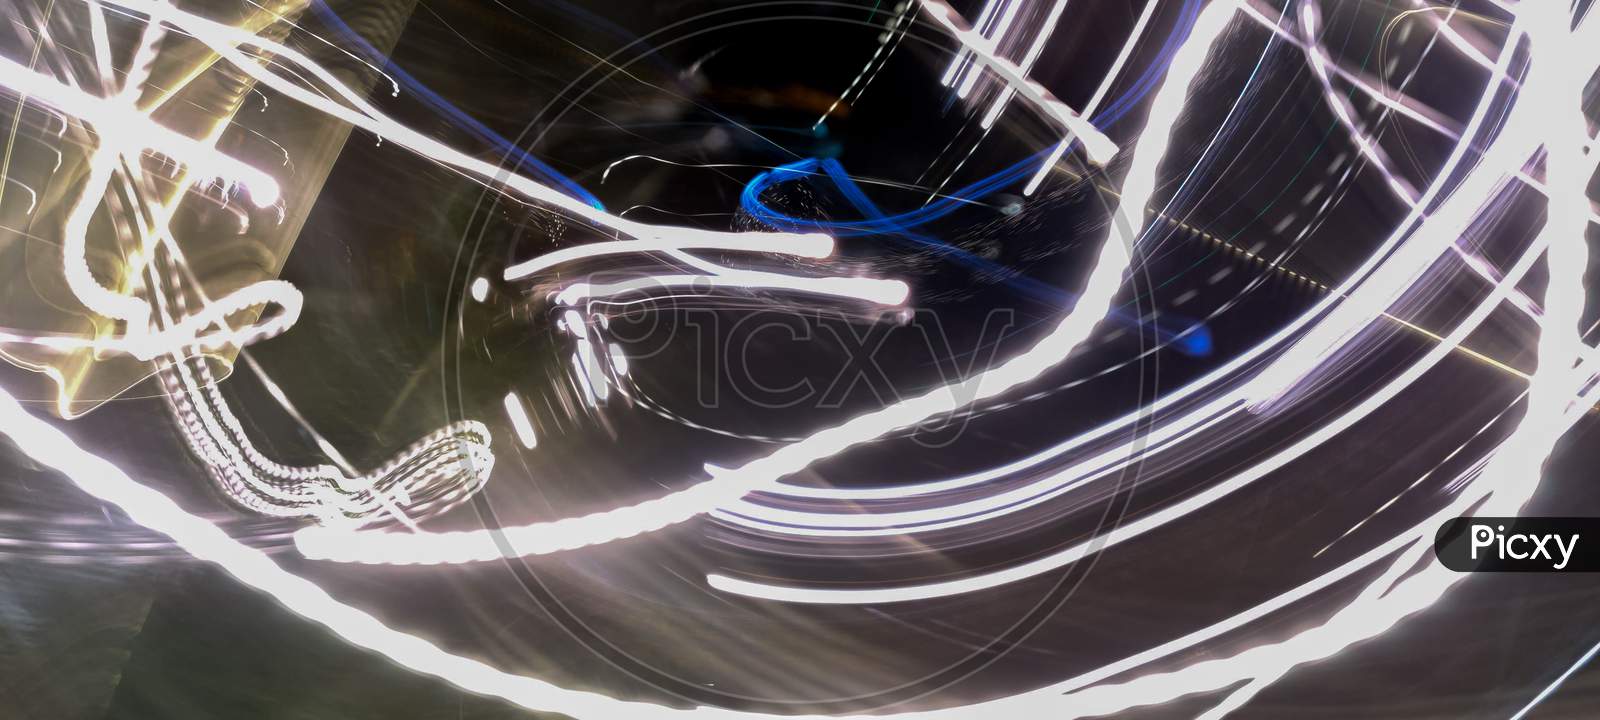 Light painting of light coming from decorative lighting source during festival season